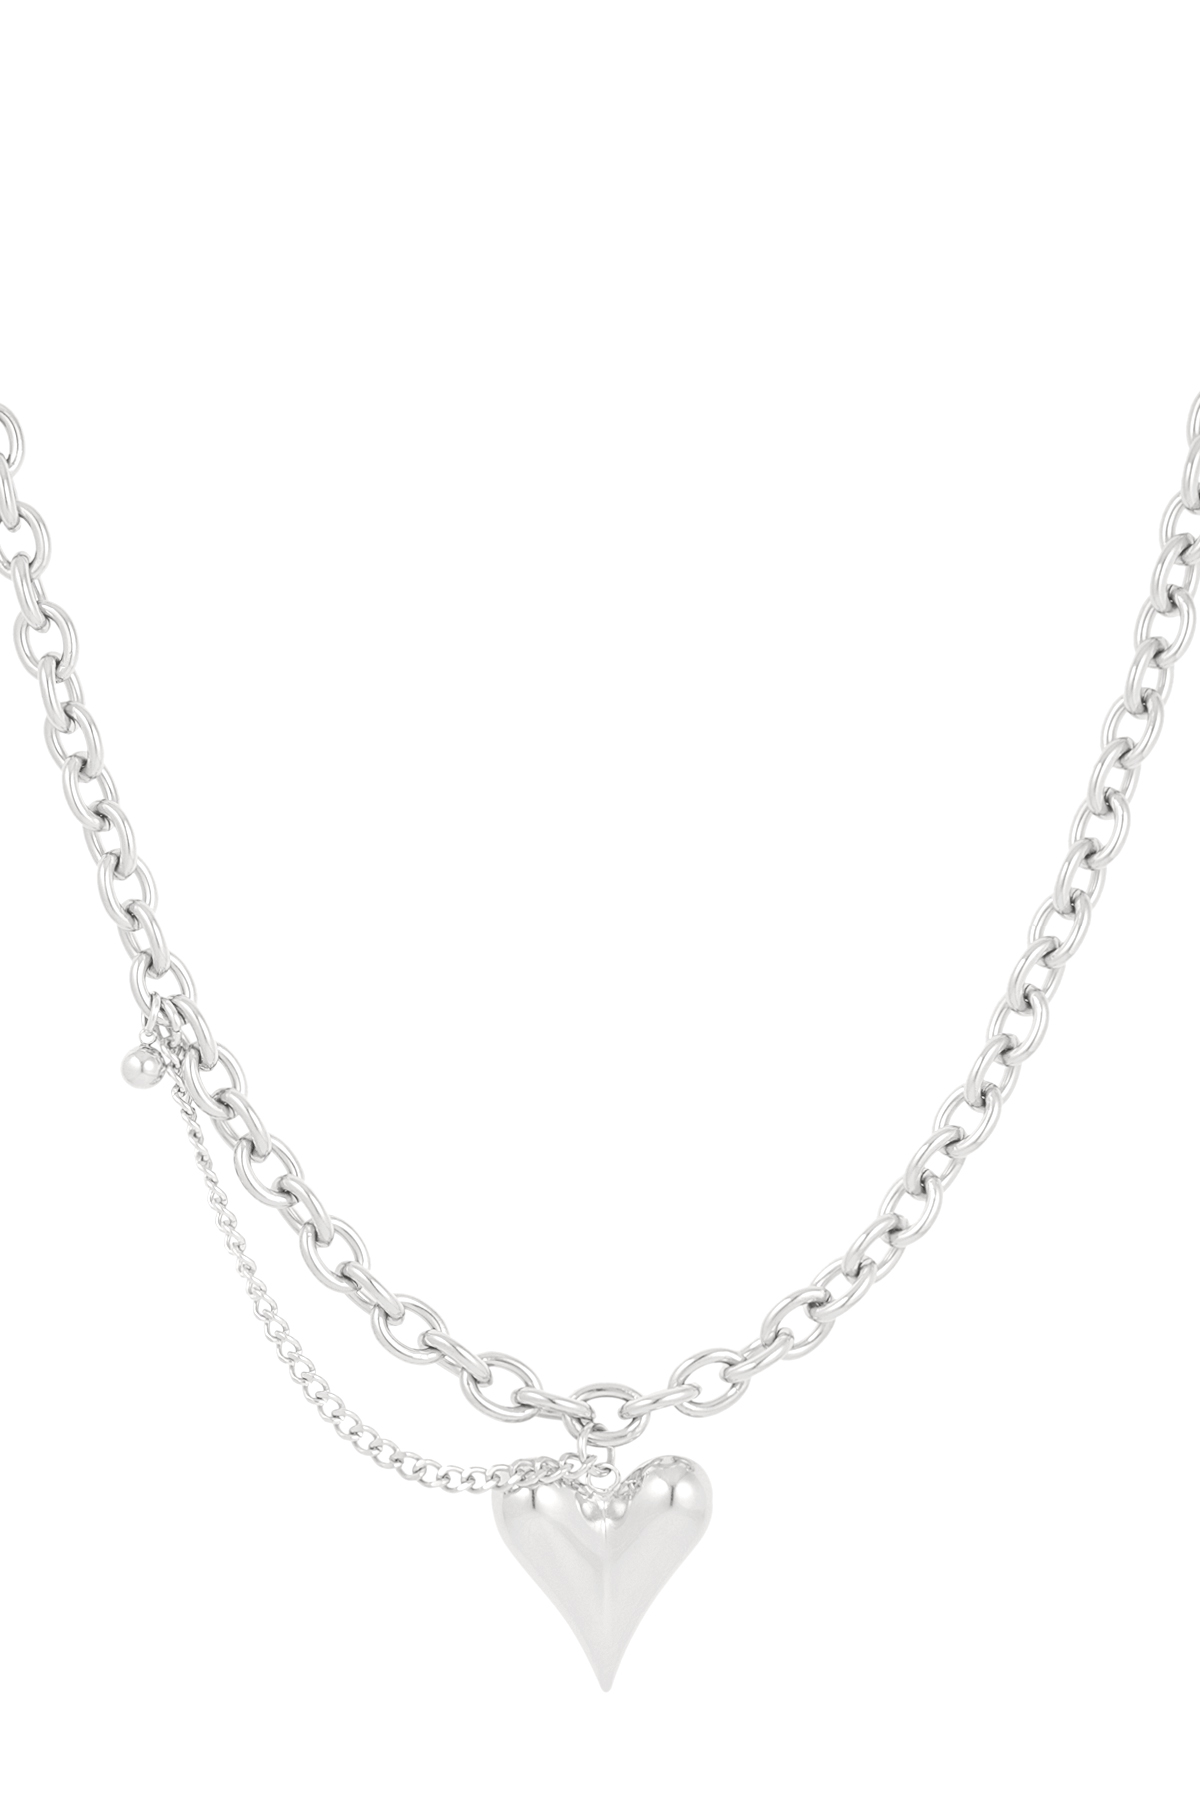 Ketting love life - zilver